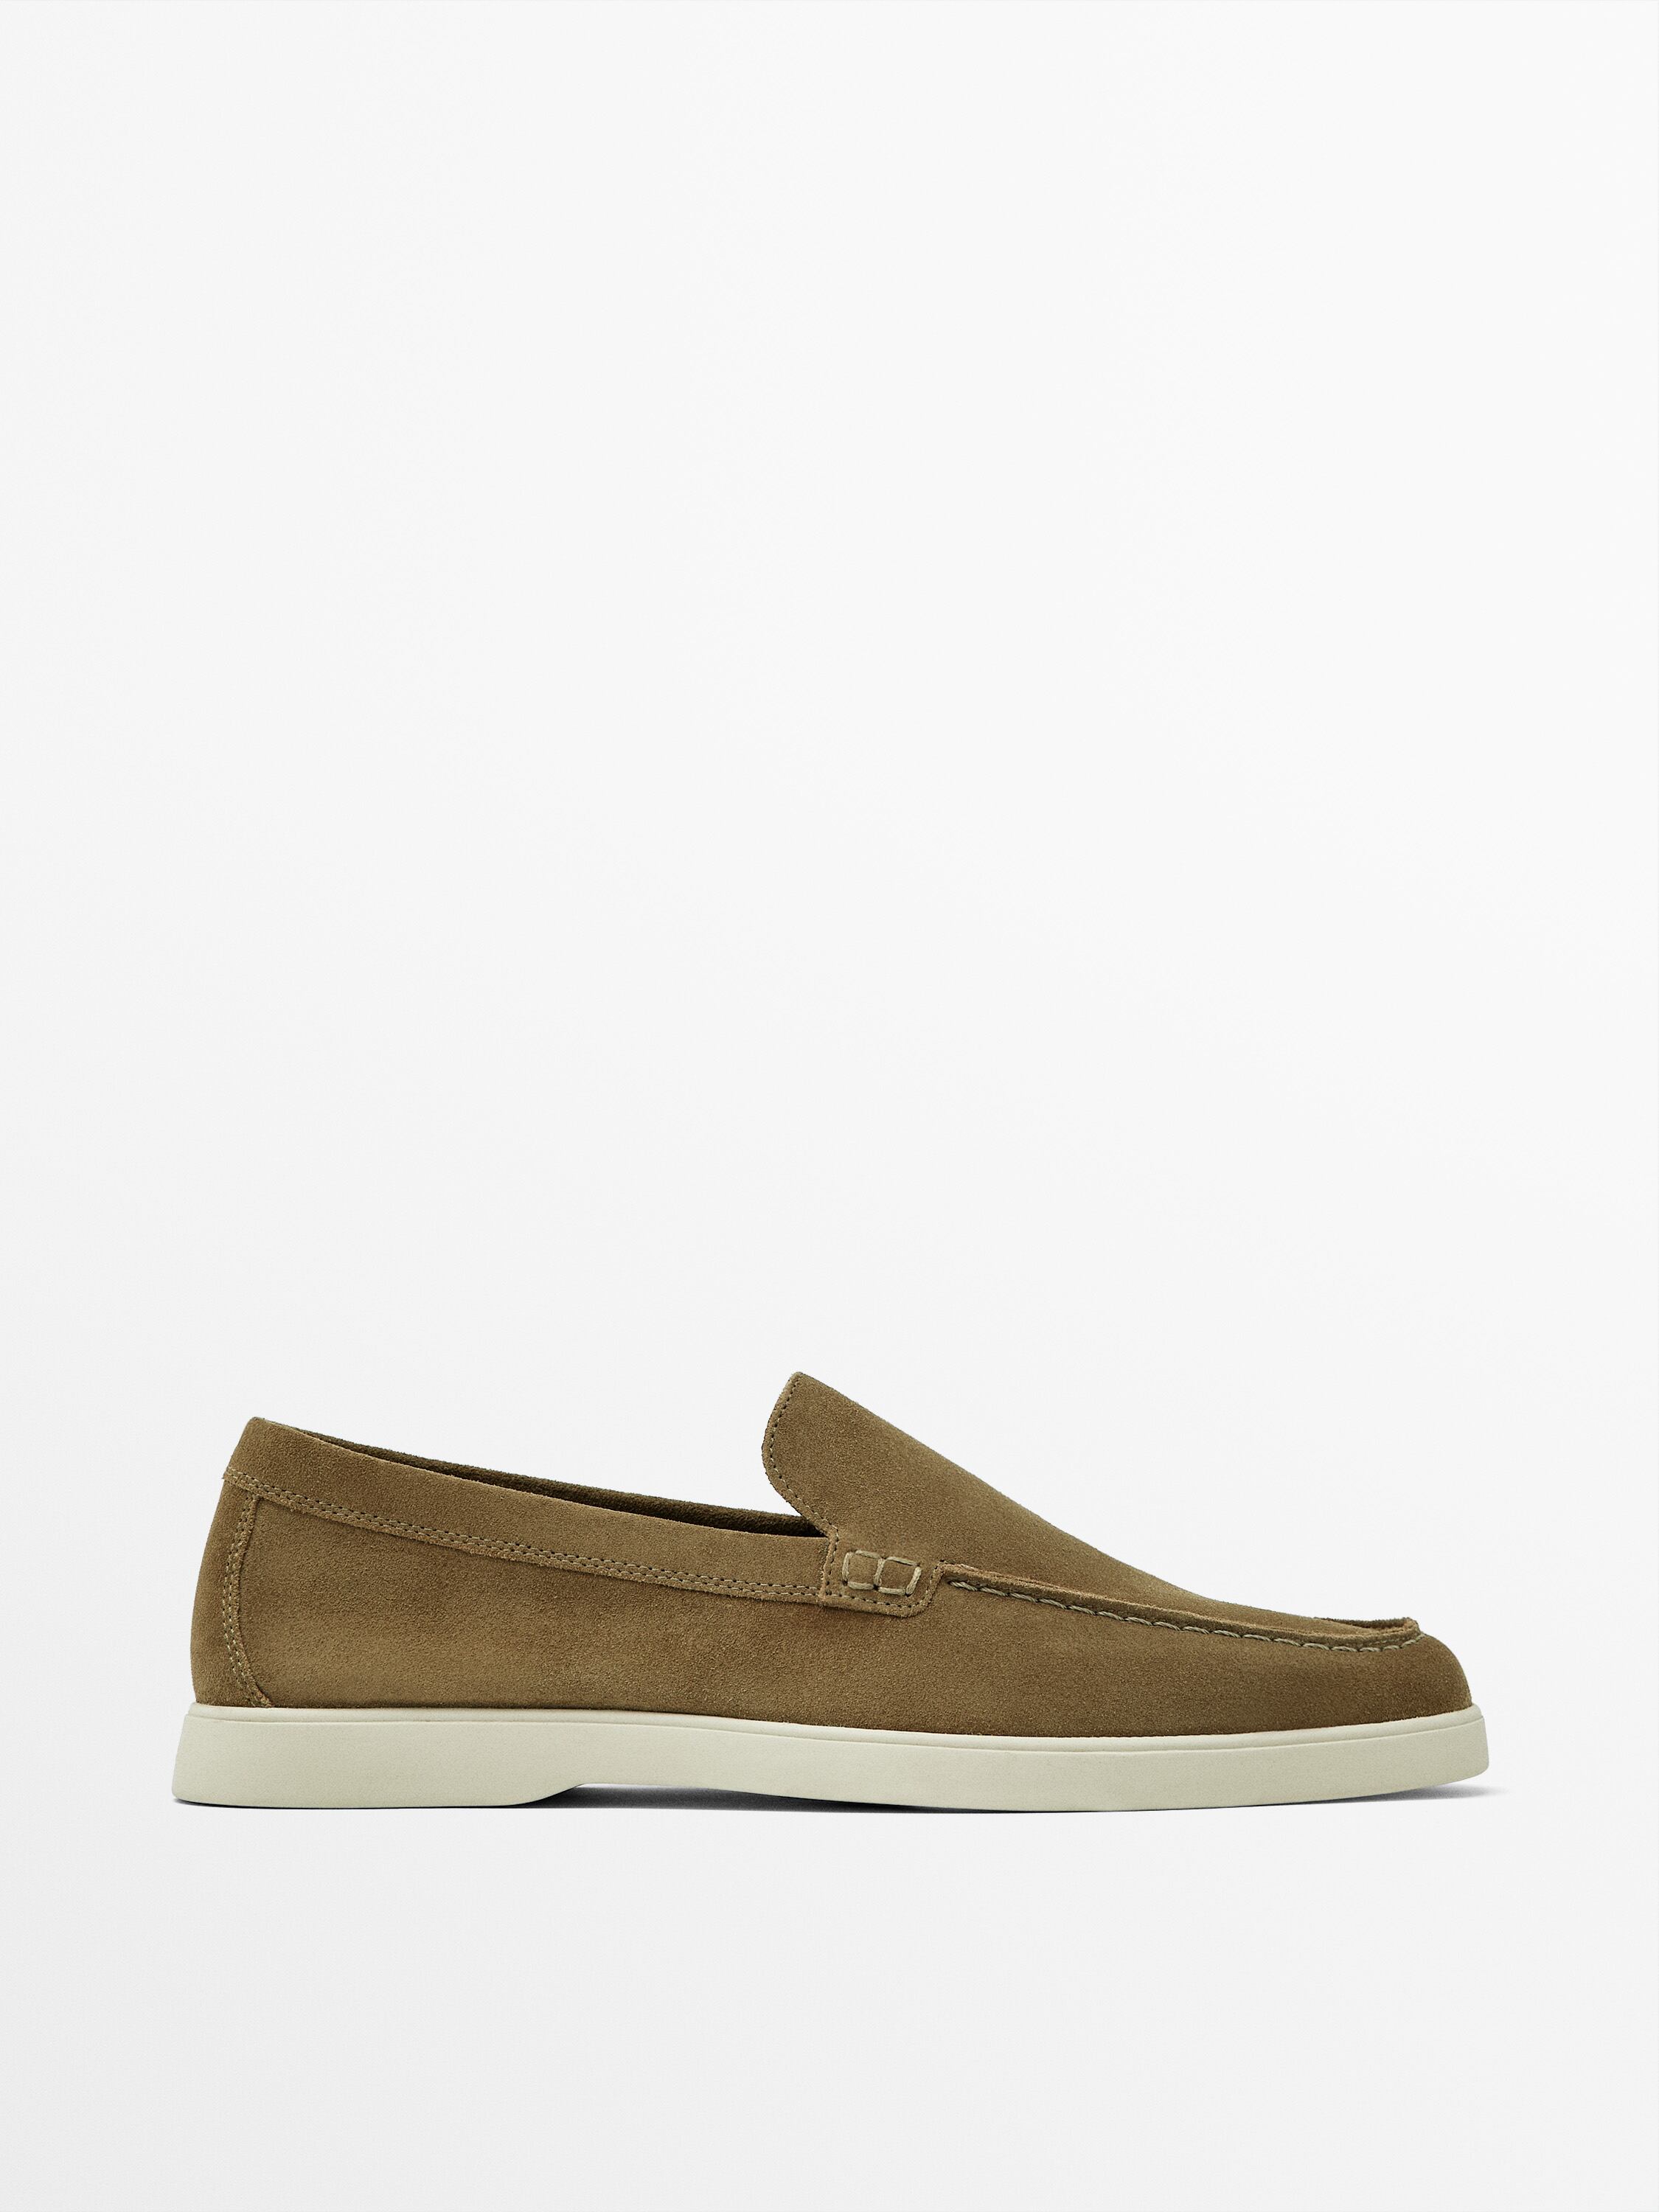 Split suede leather loafers